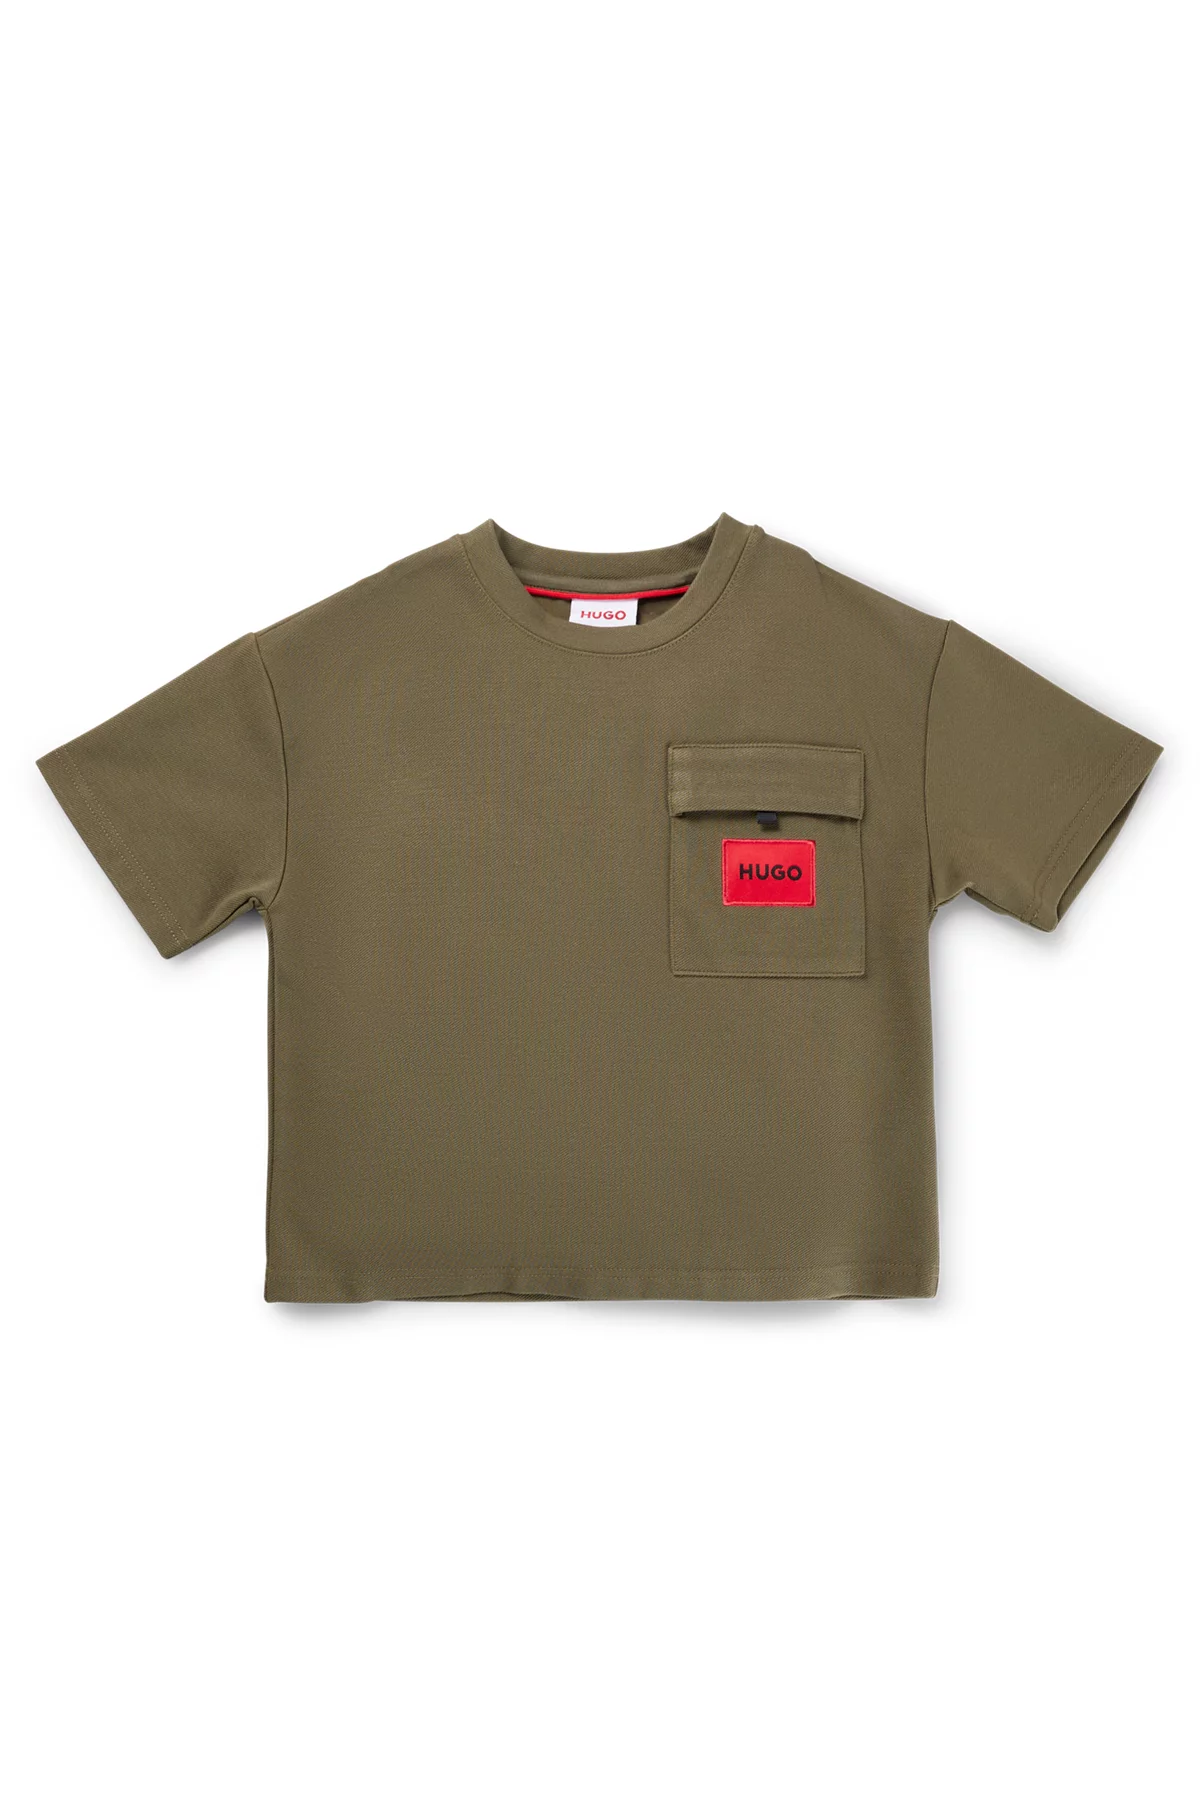 KIDS' T-SHIRT IN STRETCH JERSEY WITH RED LOGO LABEL